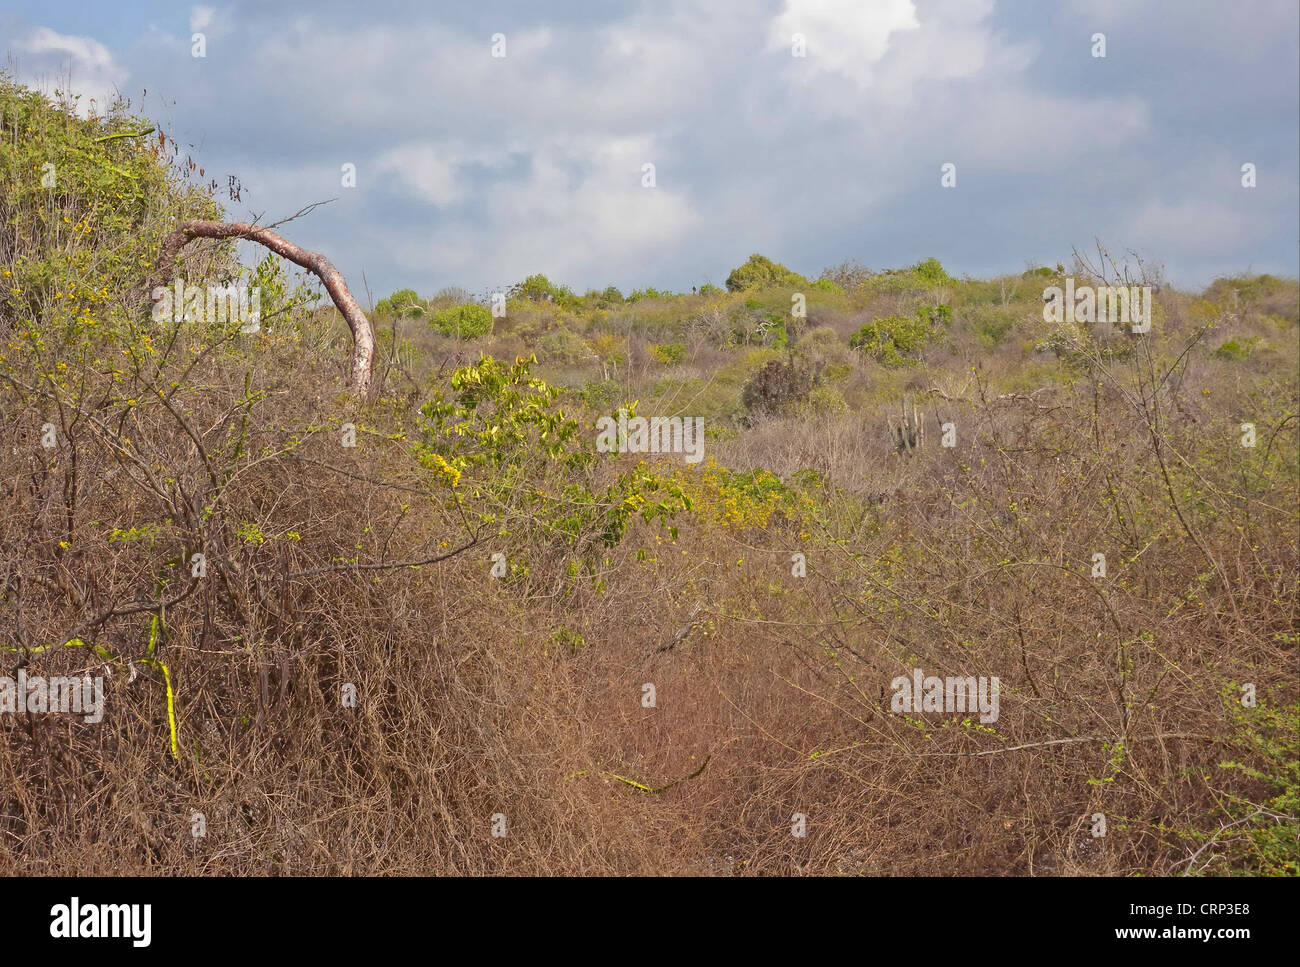 View of dry thorn scrub habitat, subtropical dry forest in arid south of island, Hellshire Hills, Jamaica, april Stock Photo